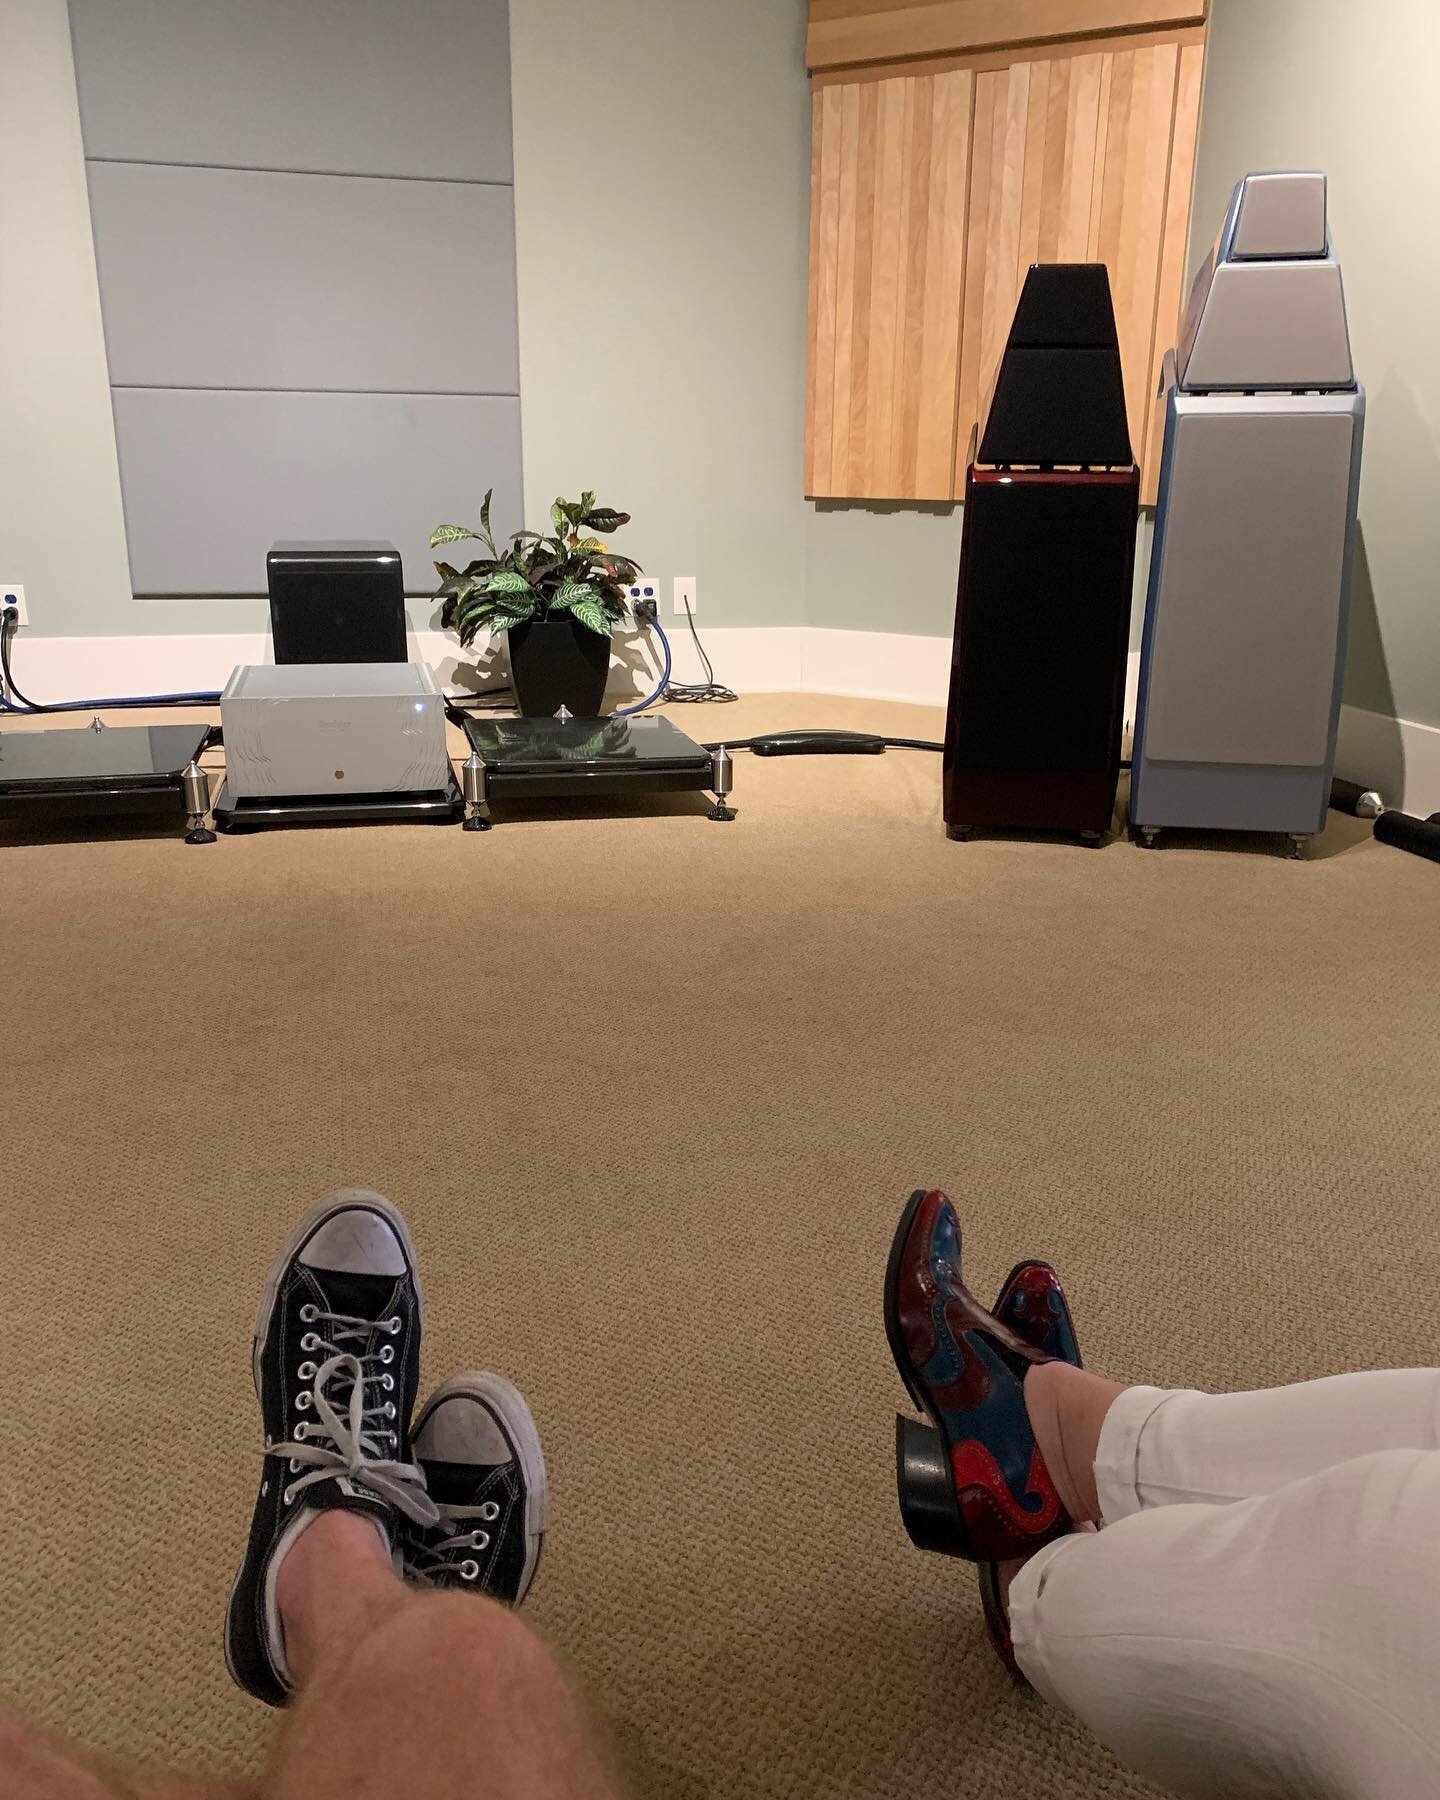 When in Pasadena visit @audio_element 

Thank you Ae for the afternoon listen with @thathifigirl 

listening to 
The @wilson.audio Alexia V
@boulderamplifiers 1160
And VTL
The room is 💯 

My song choices were 
Pearl Jam Present Tense (I love what Ed